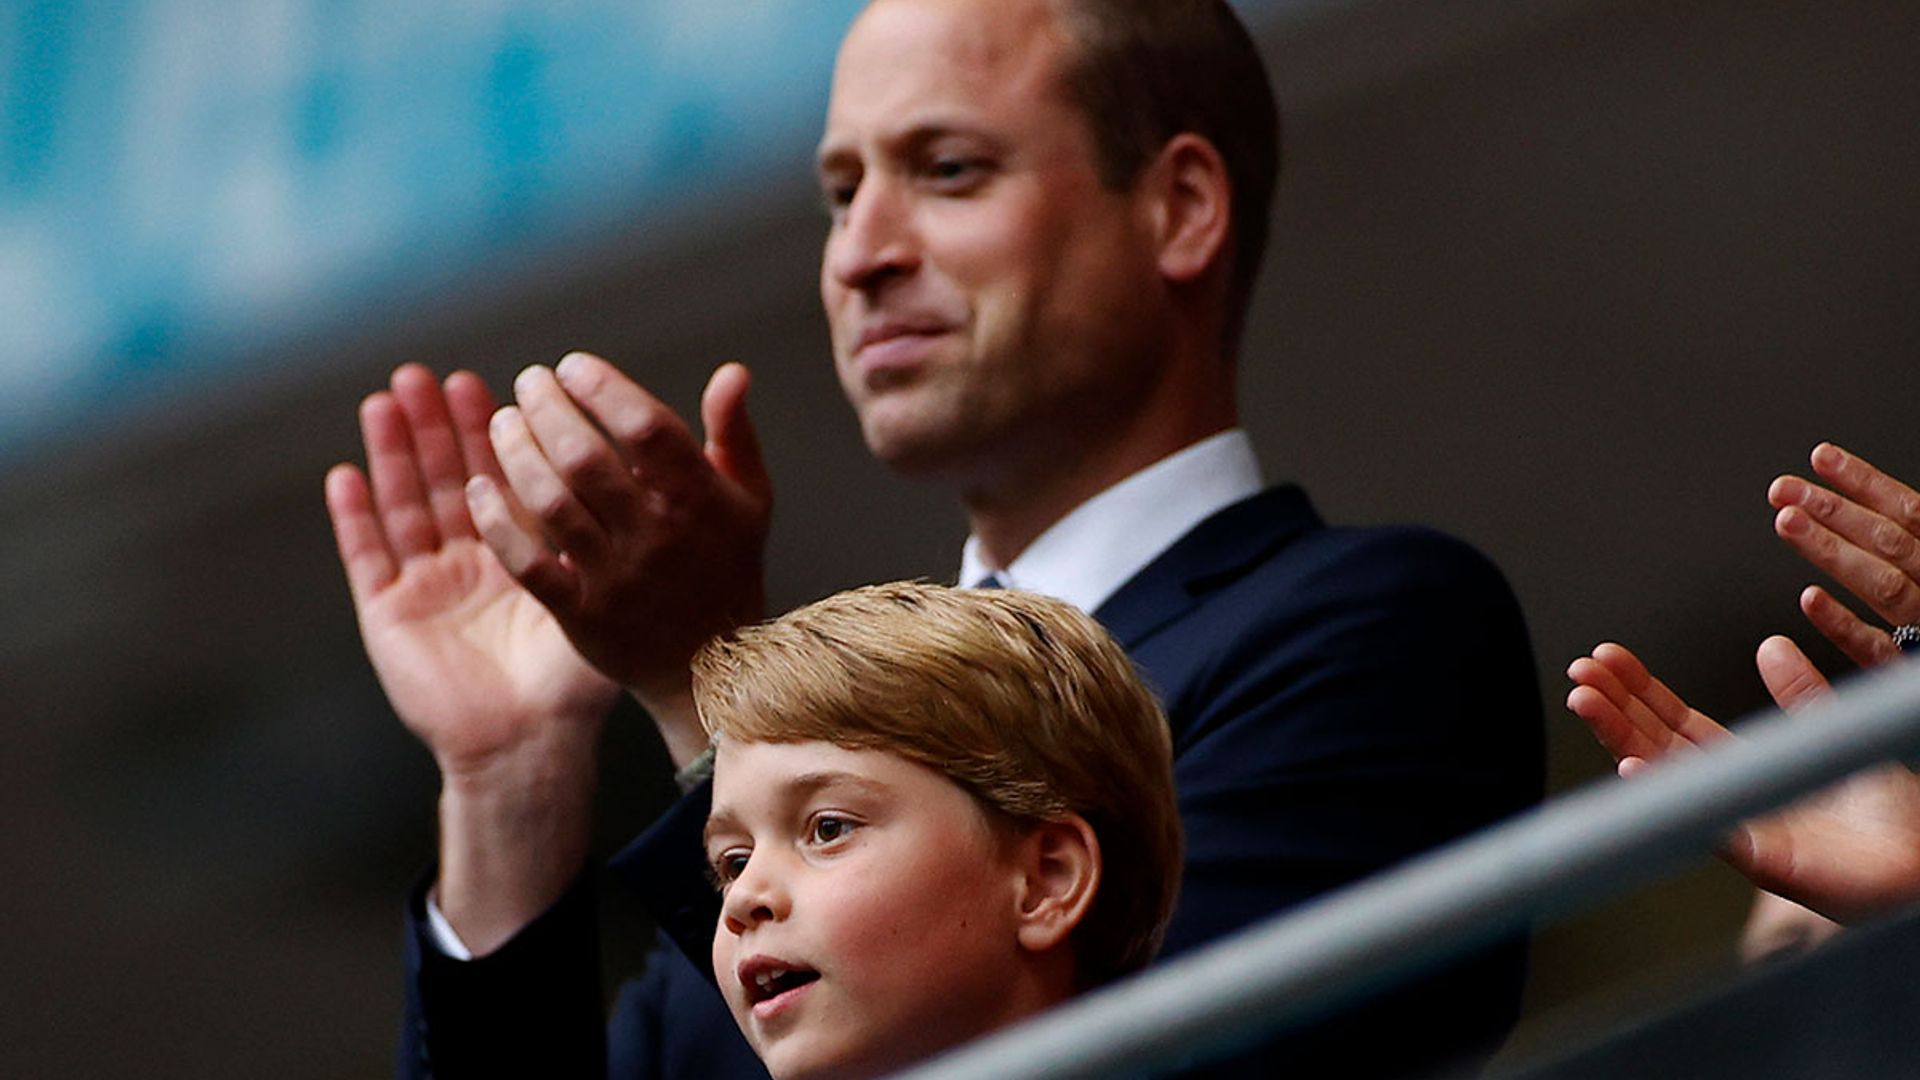 prince william and george